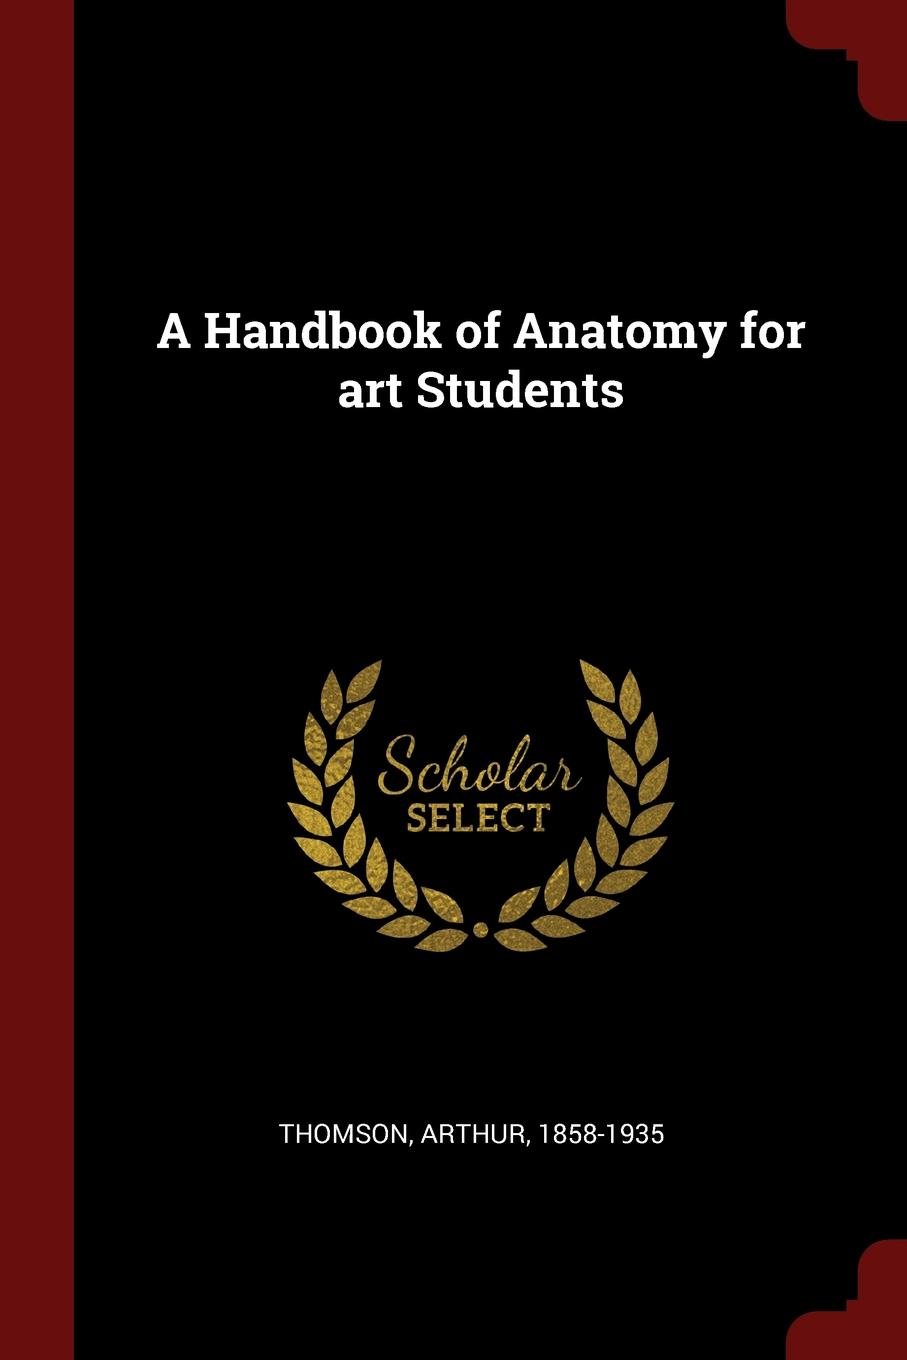 A Handbook of Anatomy for art Students